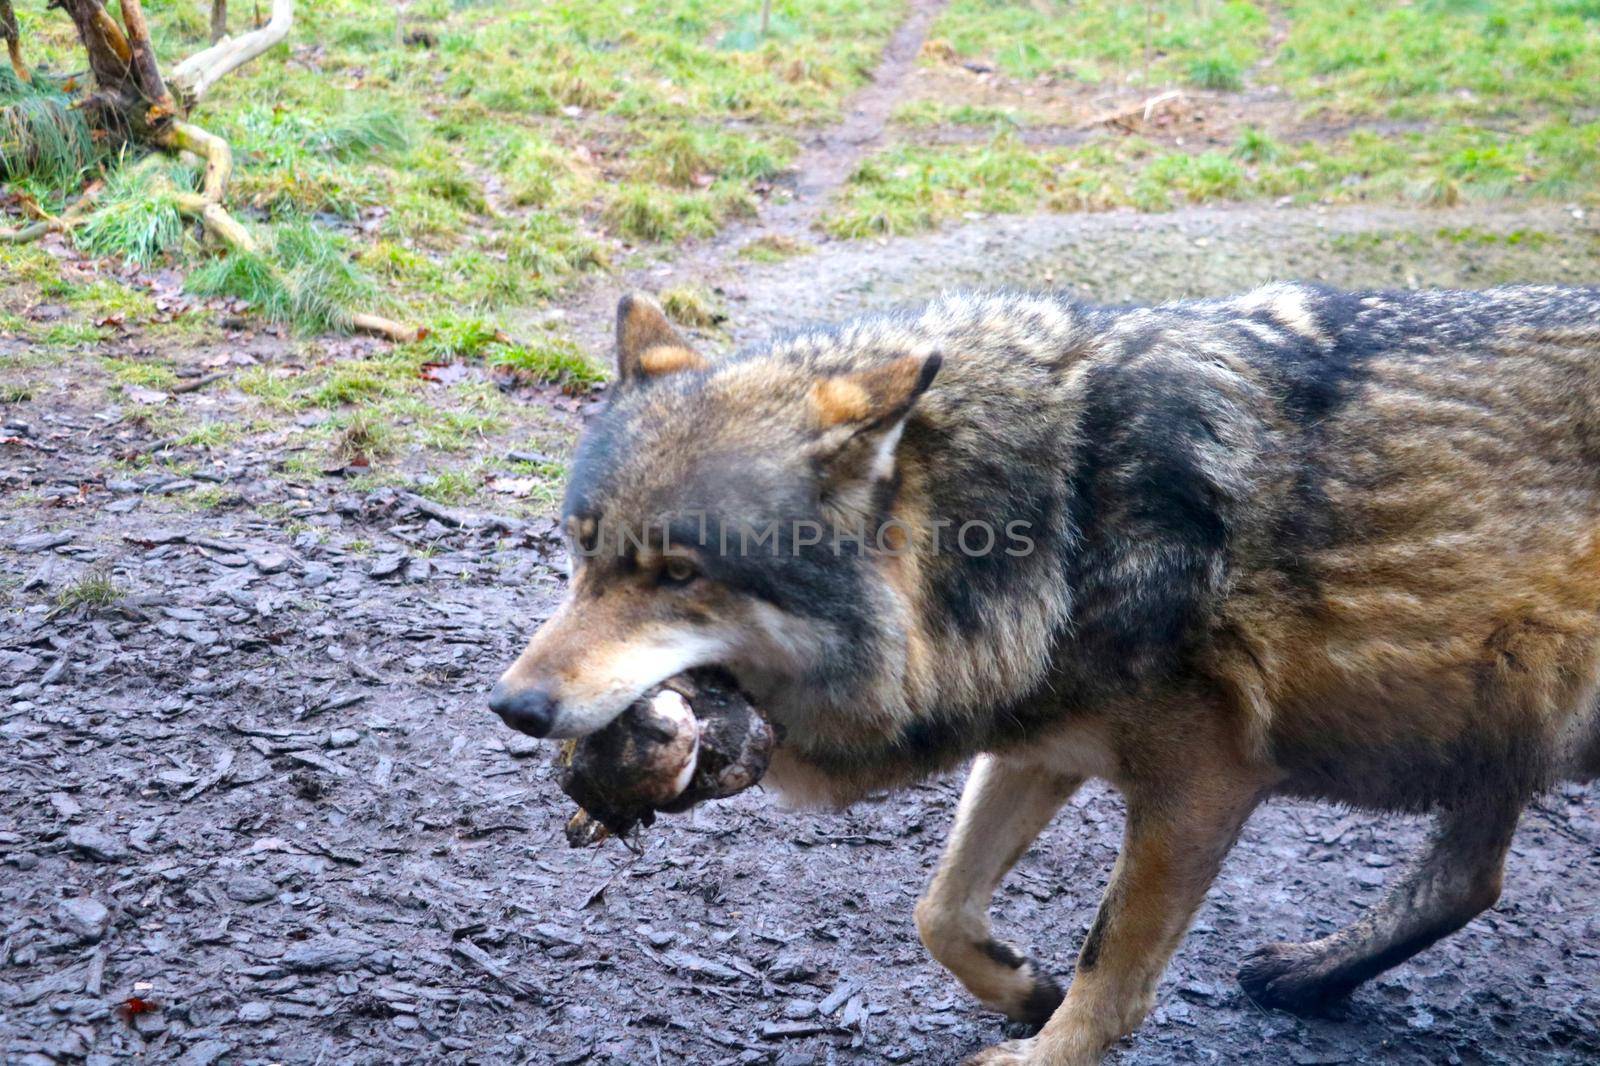 Out of focus, blurry background, wolf in mouth holding bone